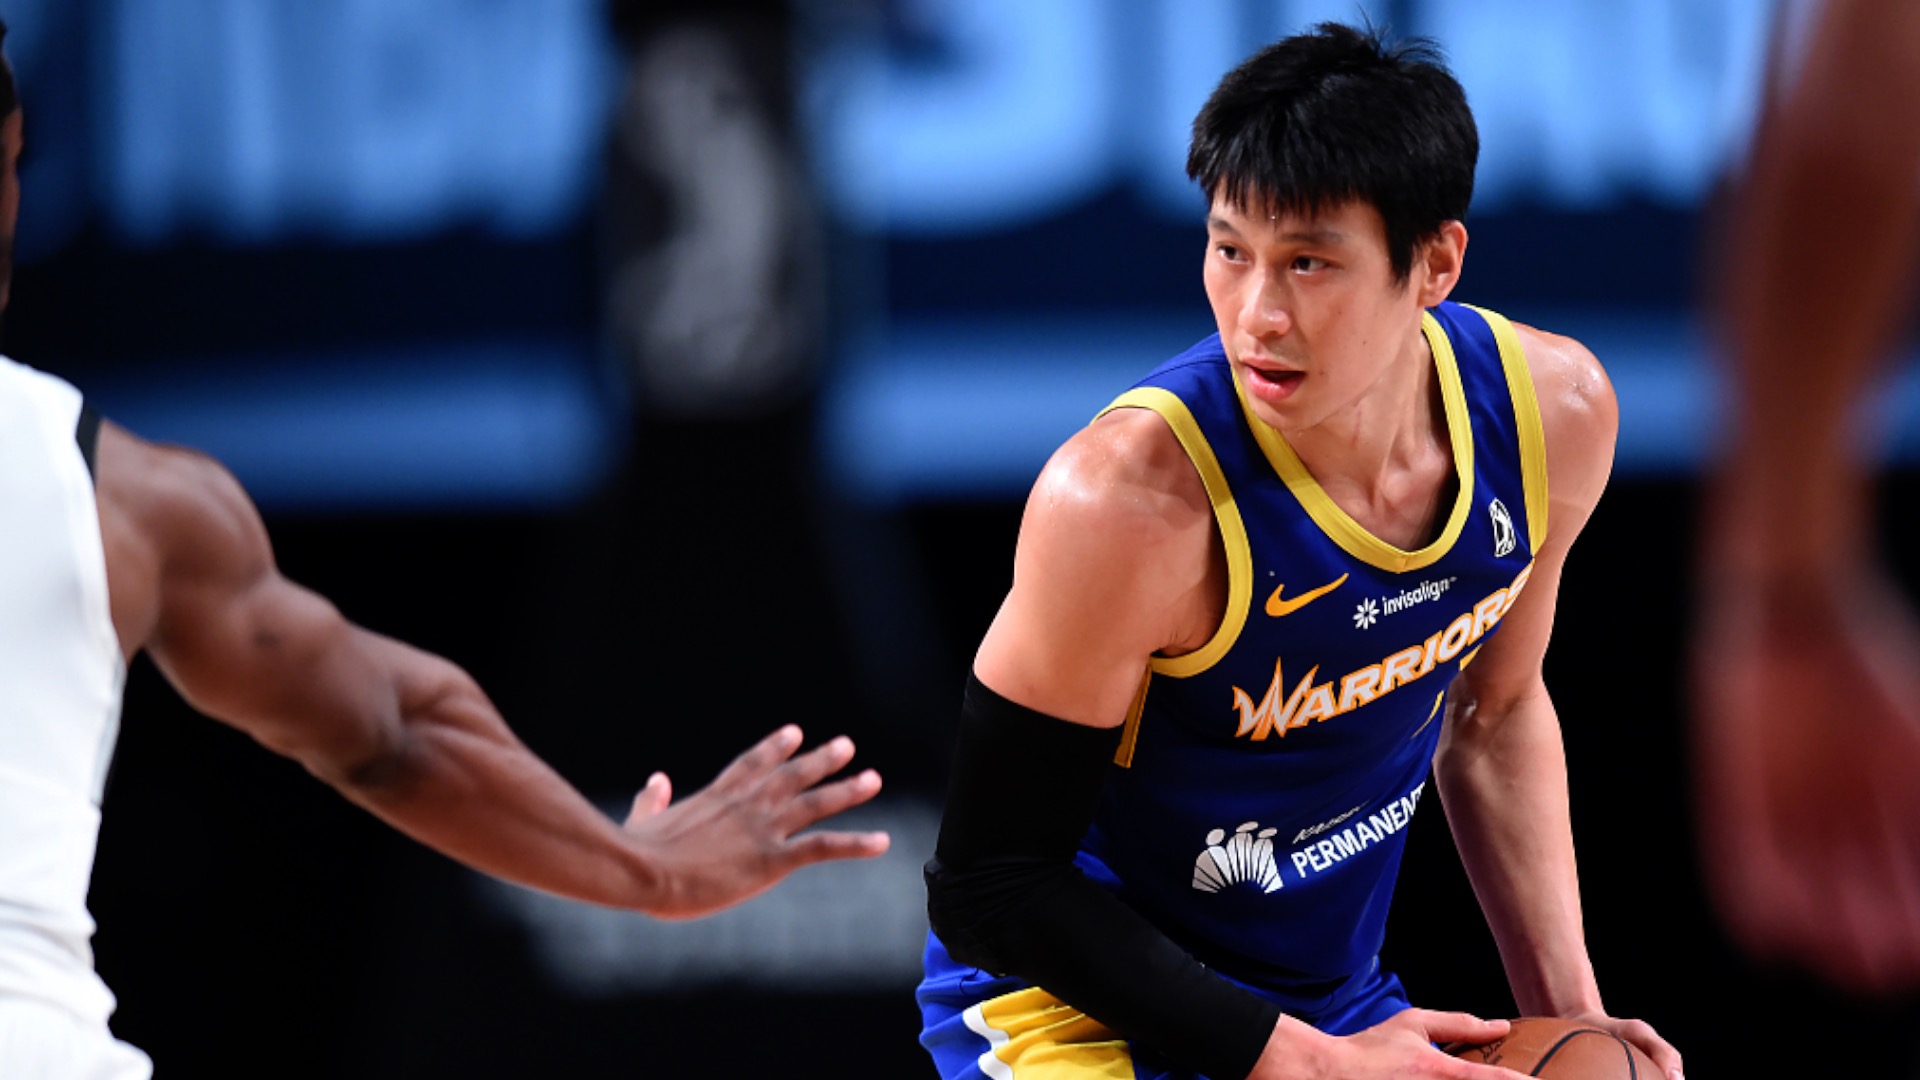 Jeremy Lin's future uncertain after elbow to head during game in